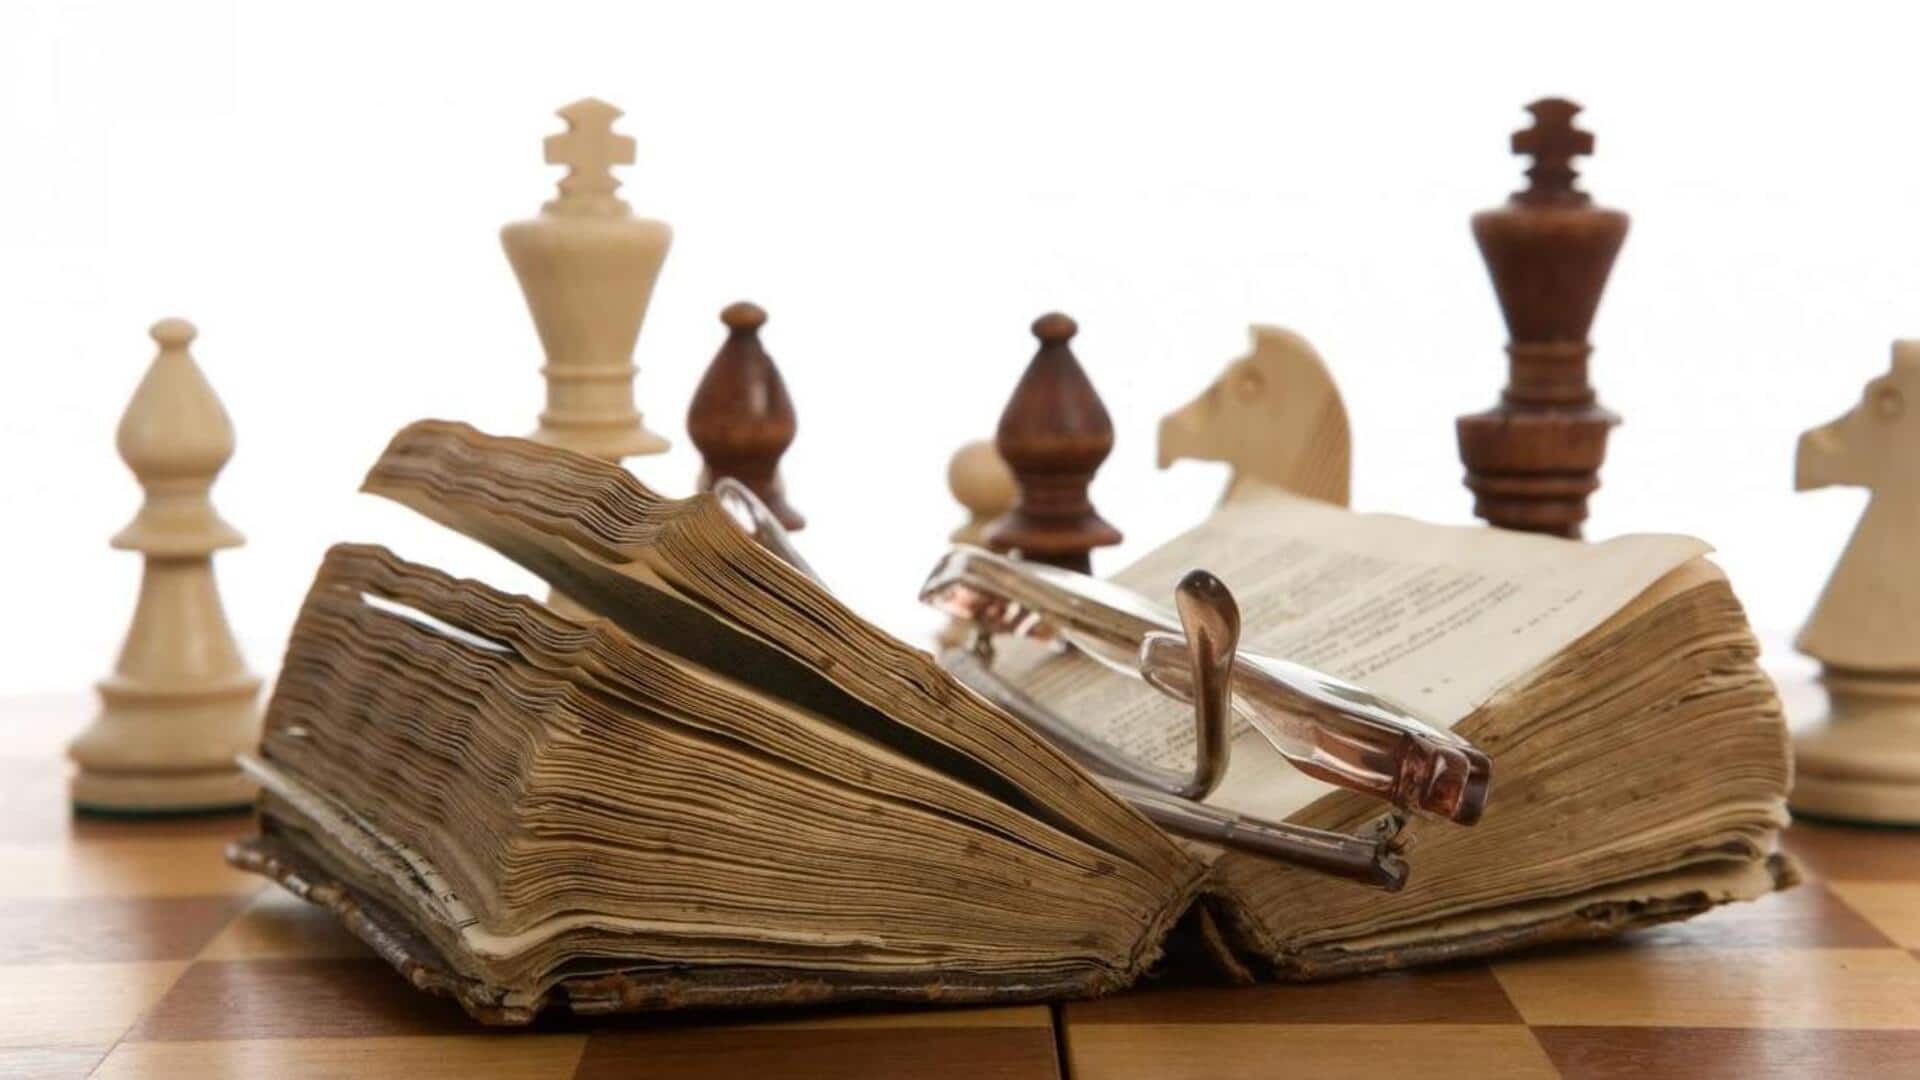 Read these strategic chess books to ace the game